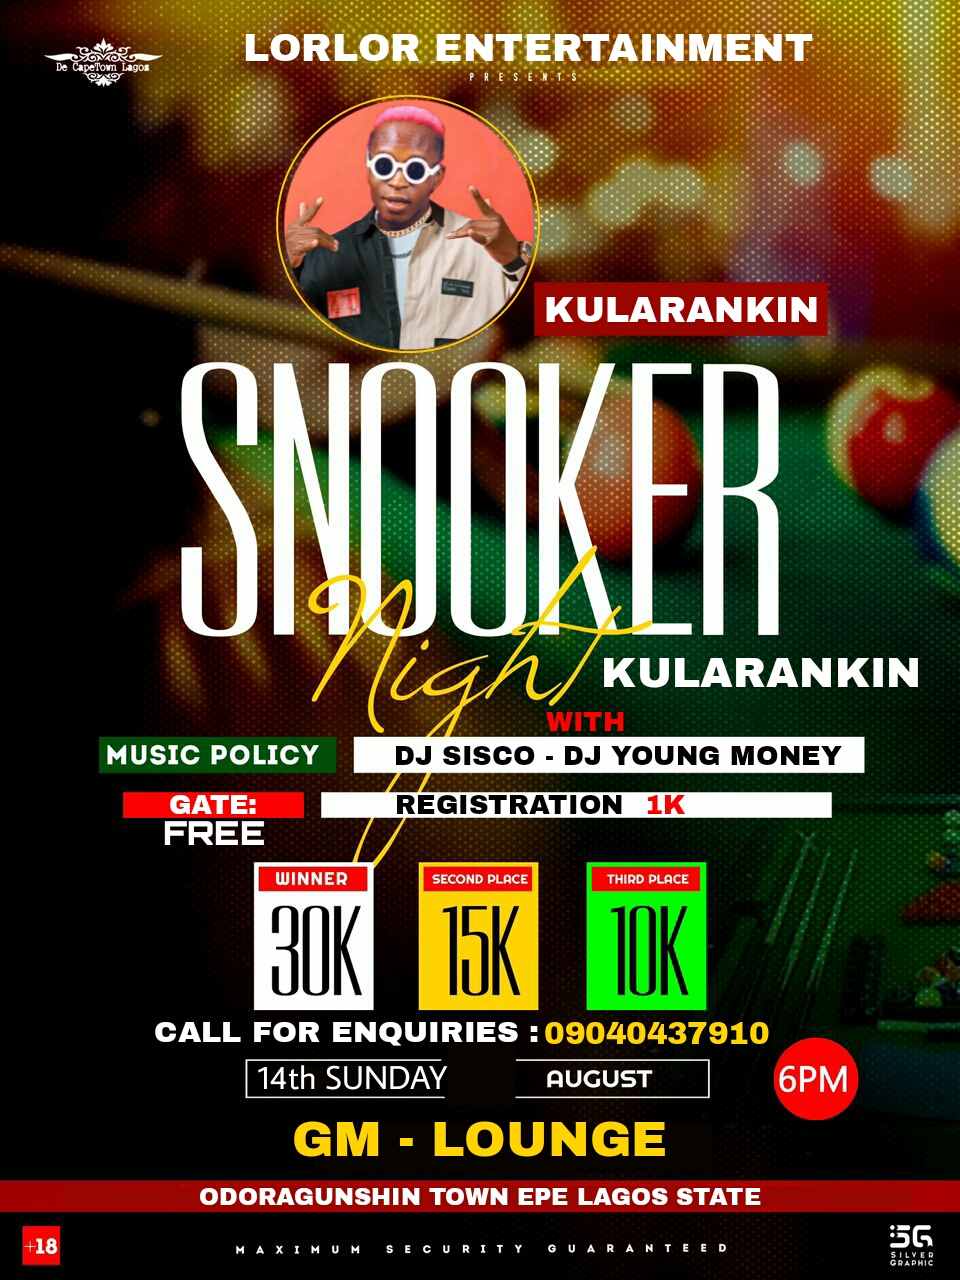 SNOOKER'S NIGHT with KULARANKIN Post free event in Nigeria using tickethub.ng, buy and sell tickets to event